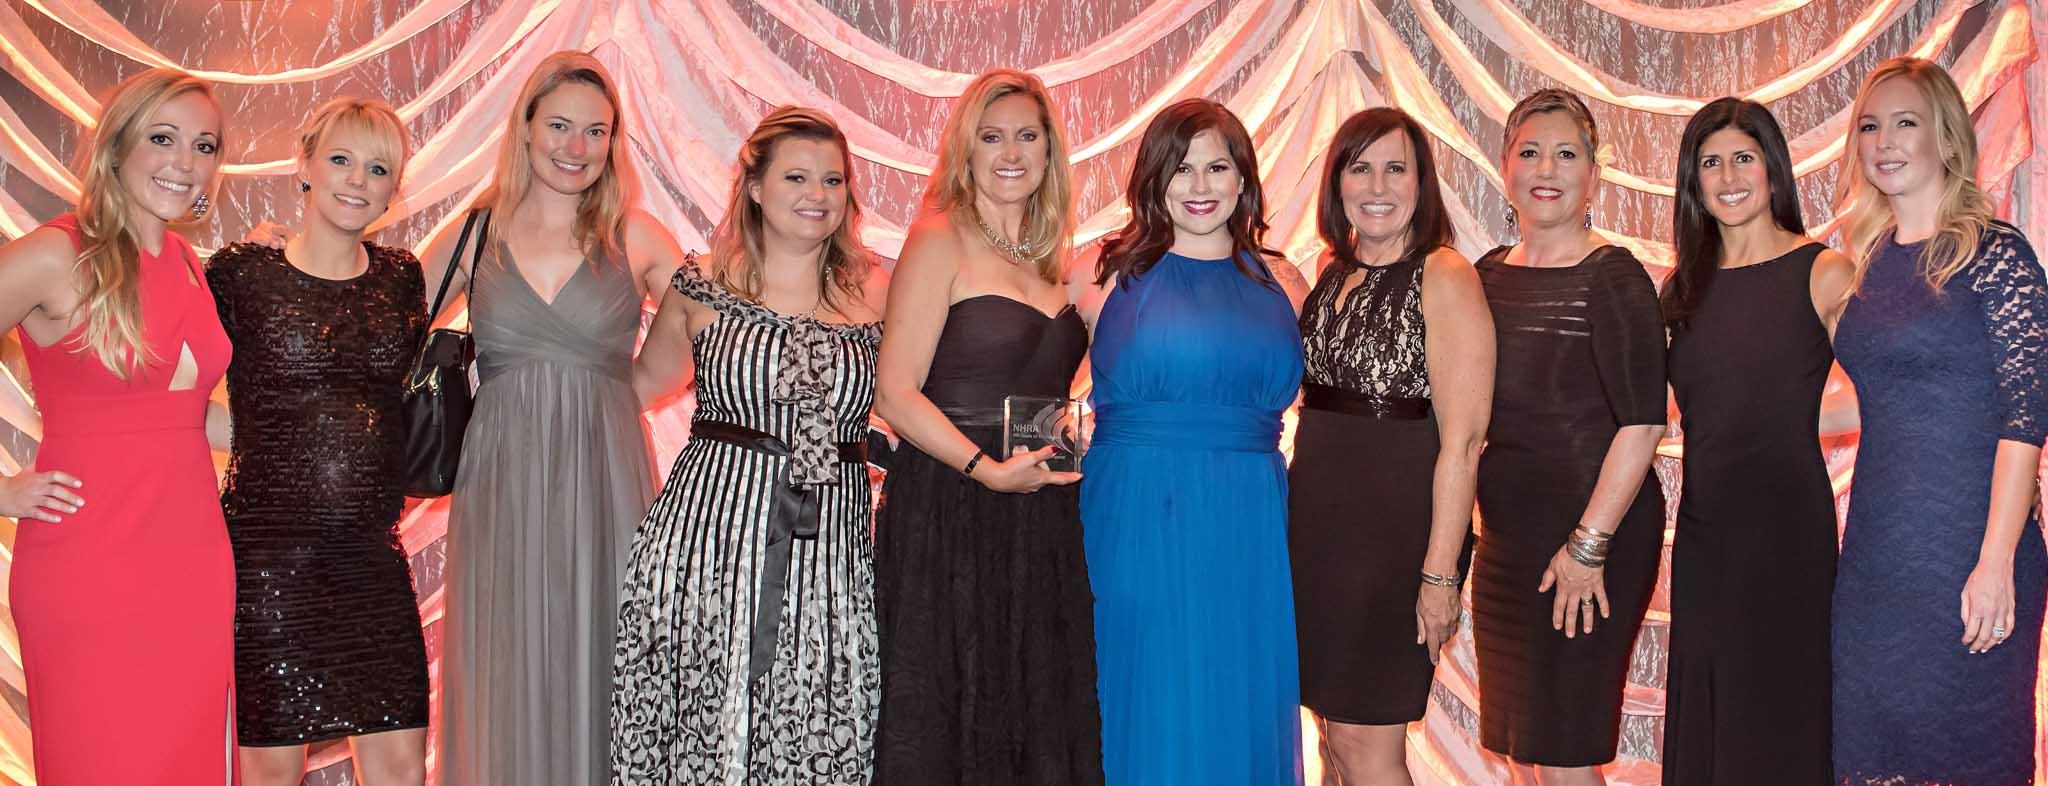 National Human Resources Association Honors The New Home Company with Team of Excellence Award